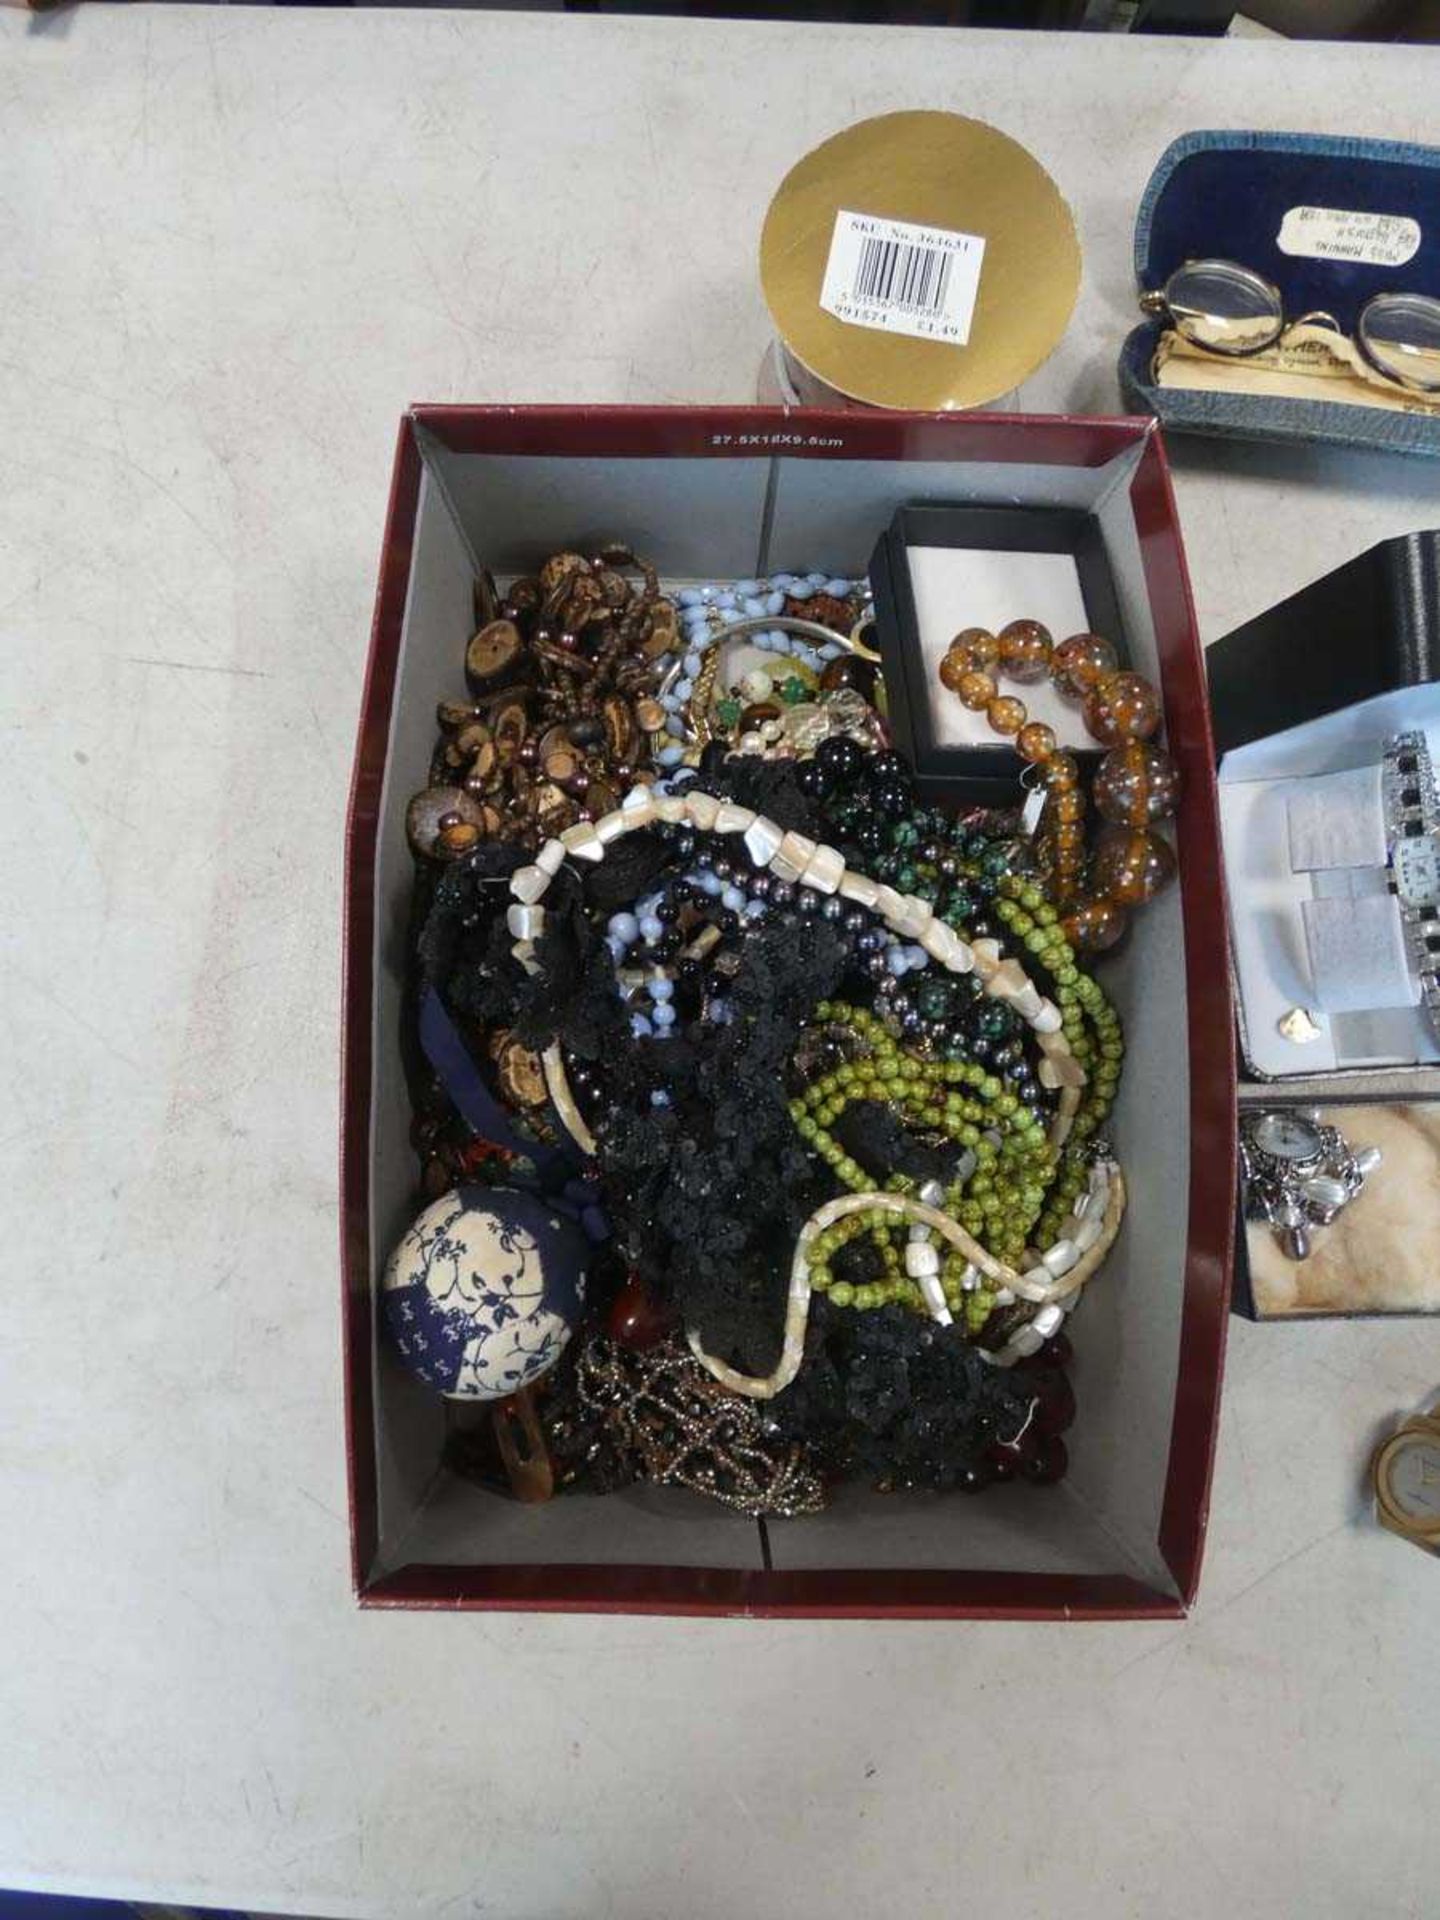 Box containing various necklaces, jewellery items and a Sibon 21 jewel Swiss made watch - Image 2 of 2